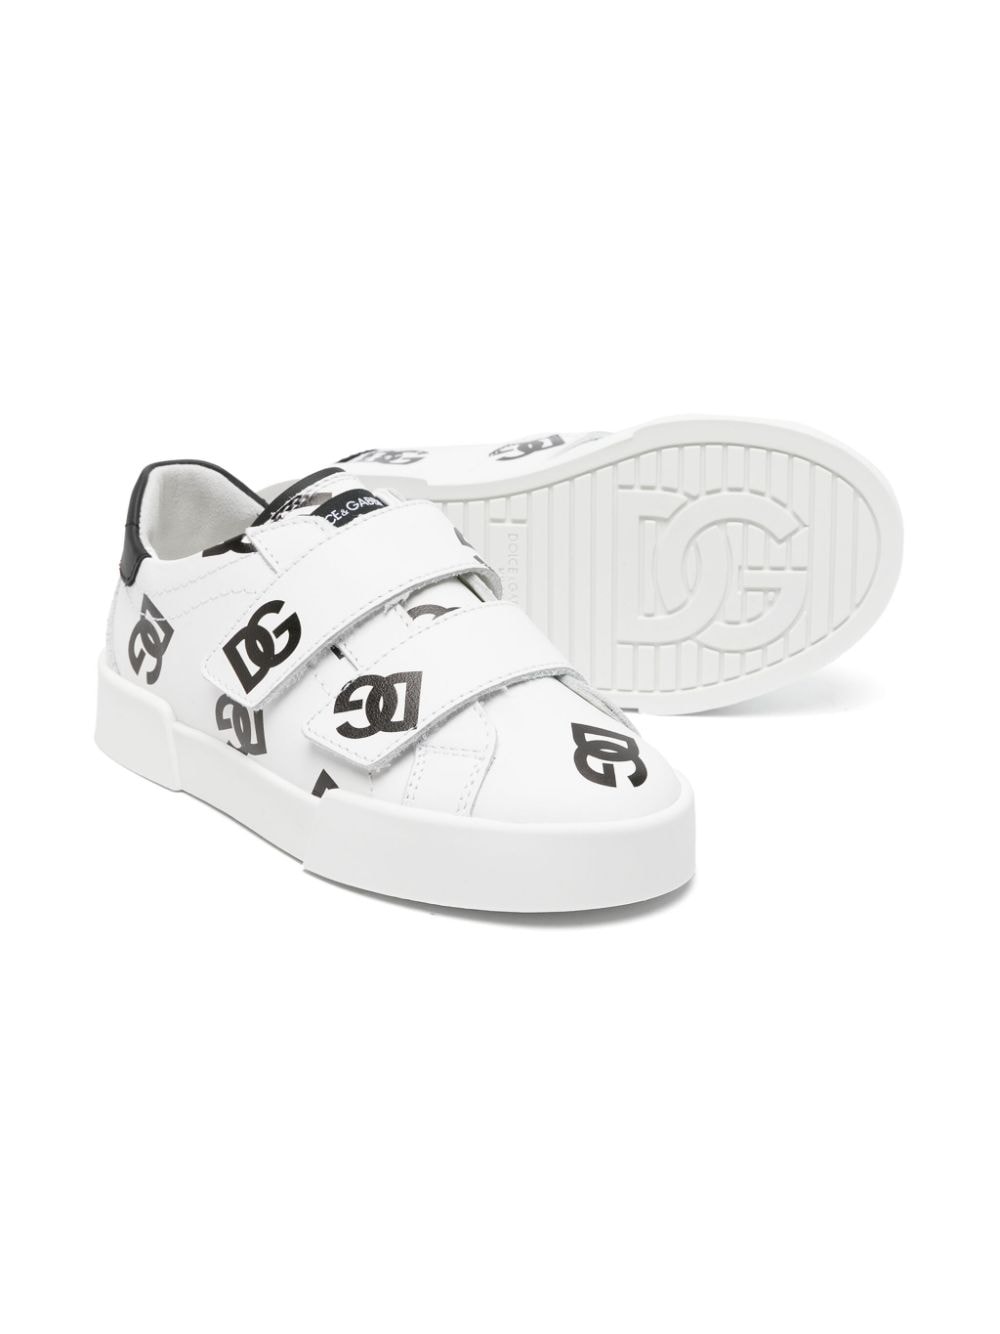 Black and white shoes for children